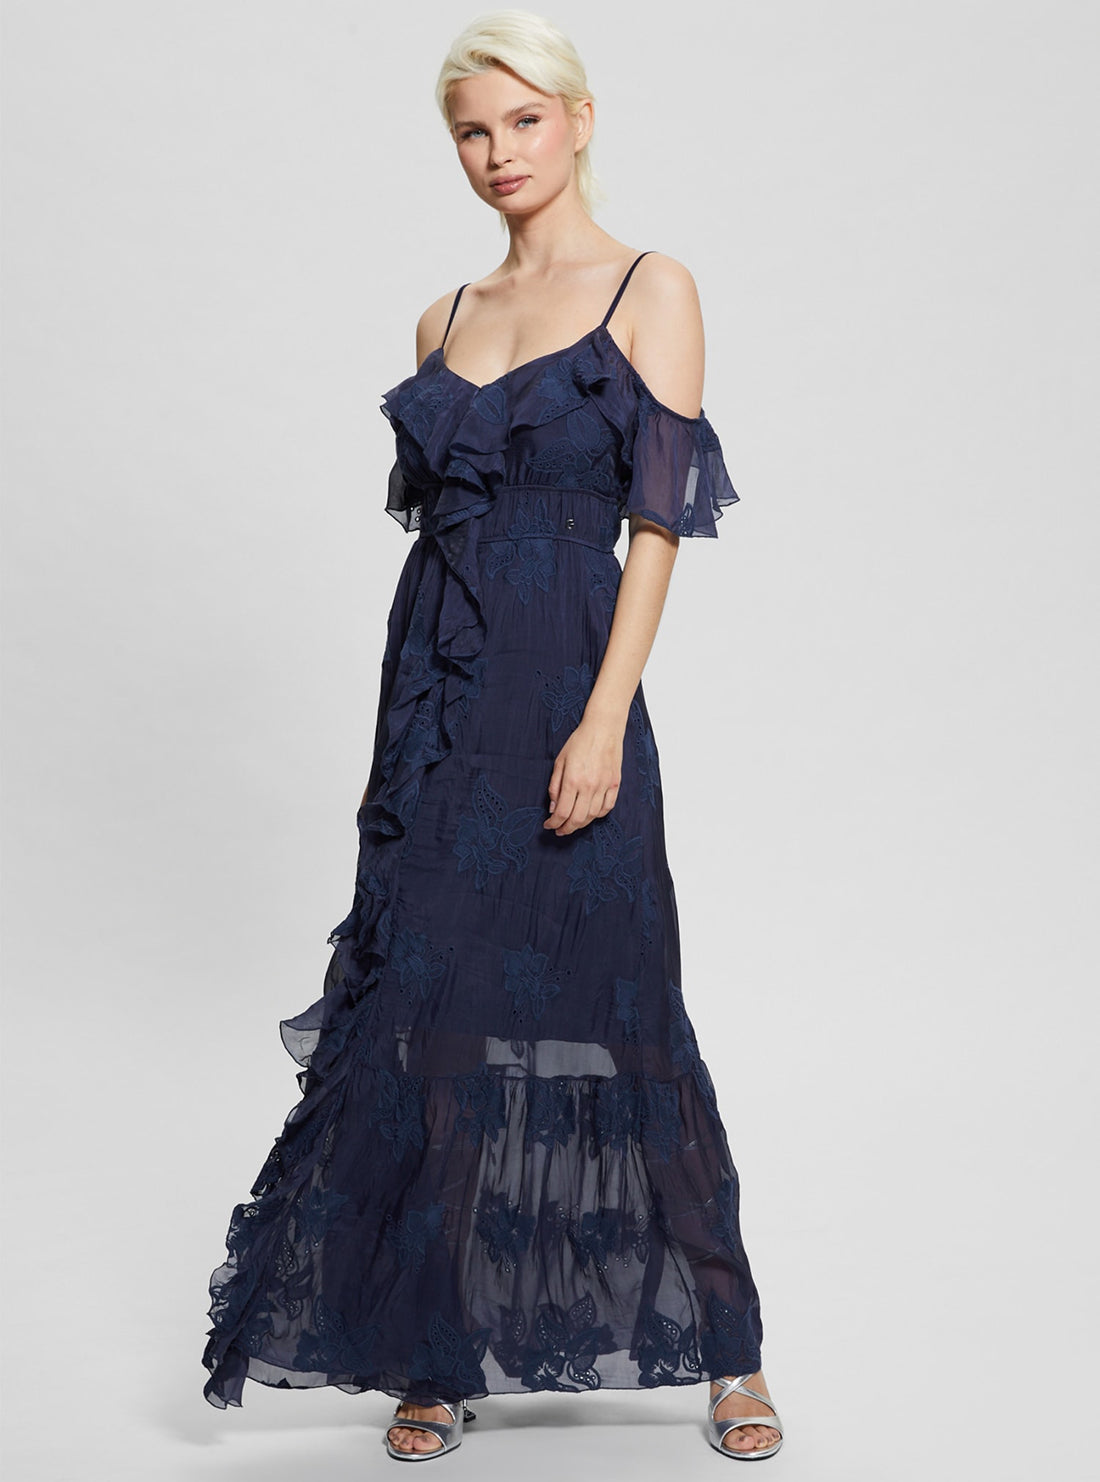 GUESS Navy Elide Maxi Dress front view